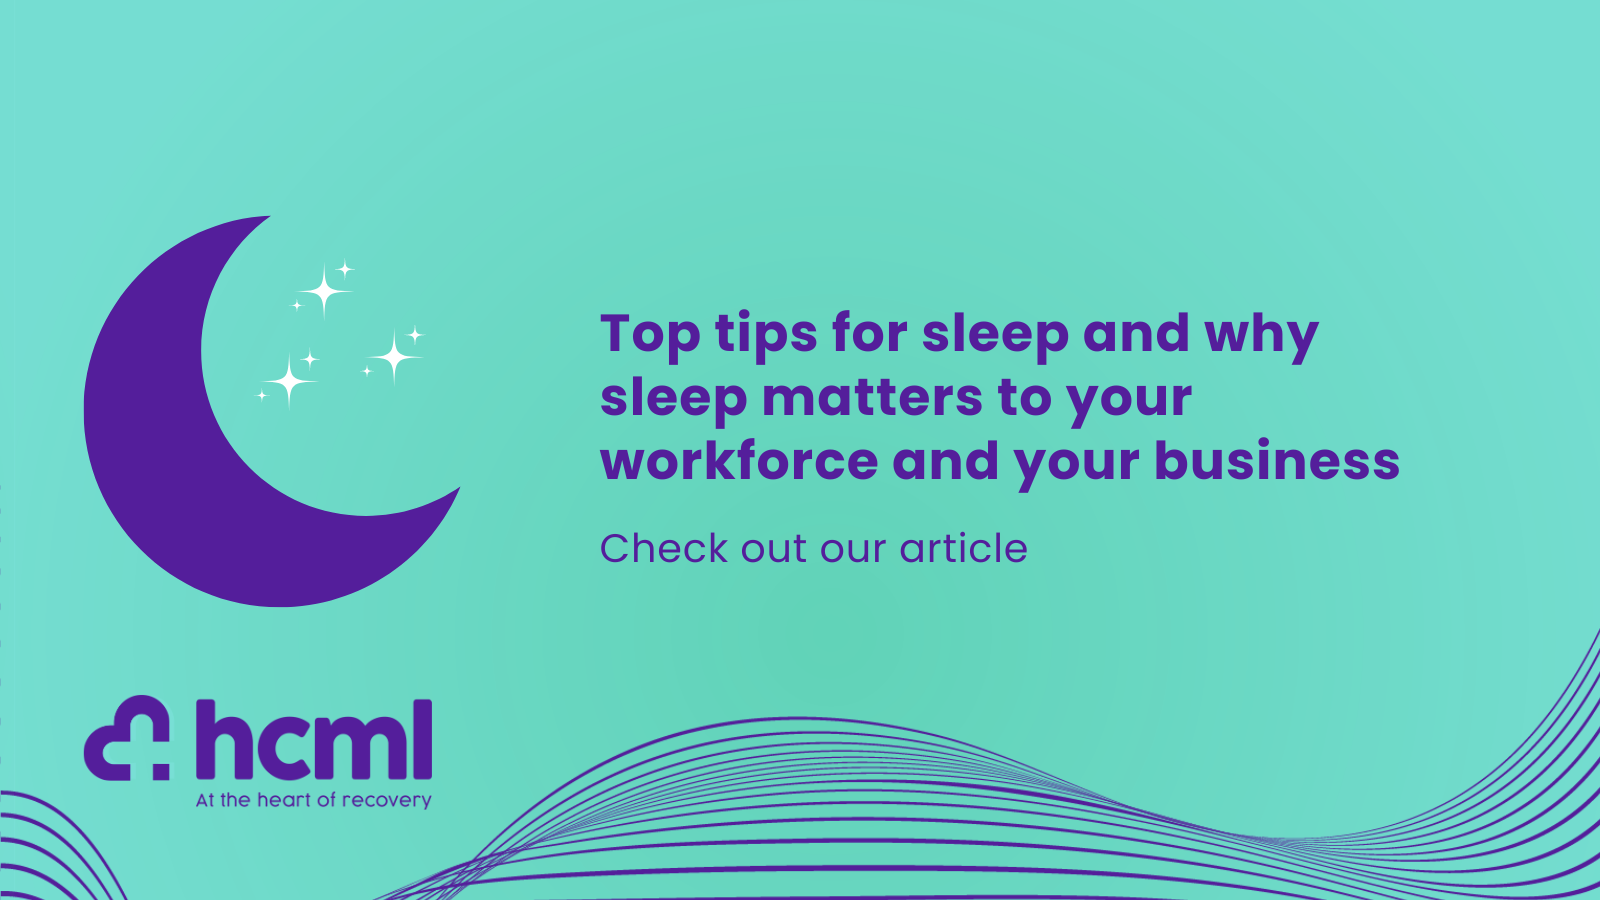 Top tips for sleep and why sleep matters to your workforce and your business